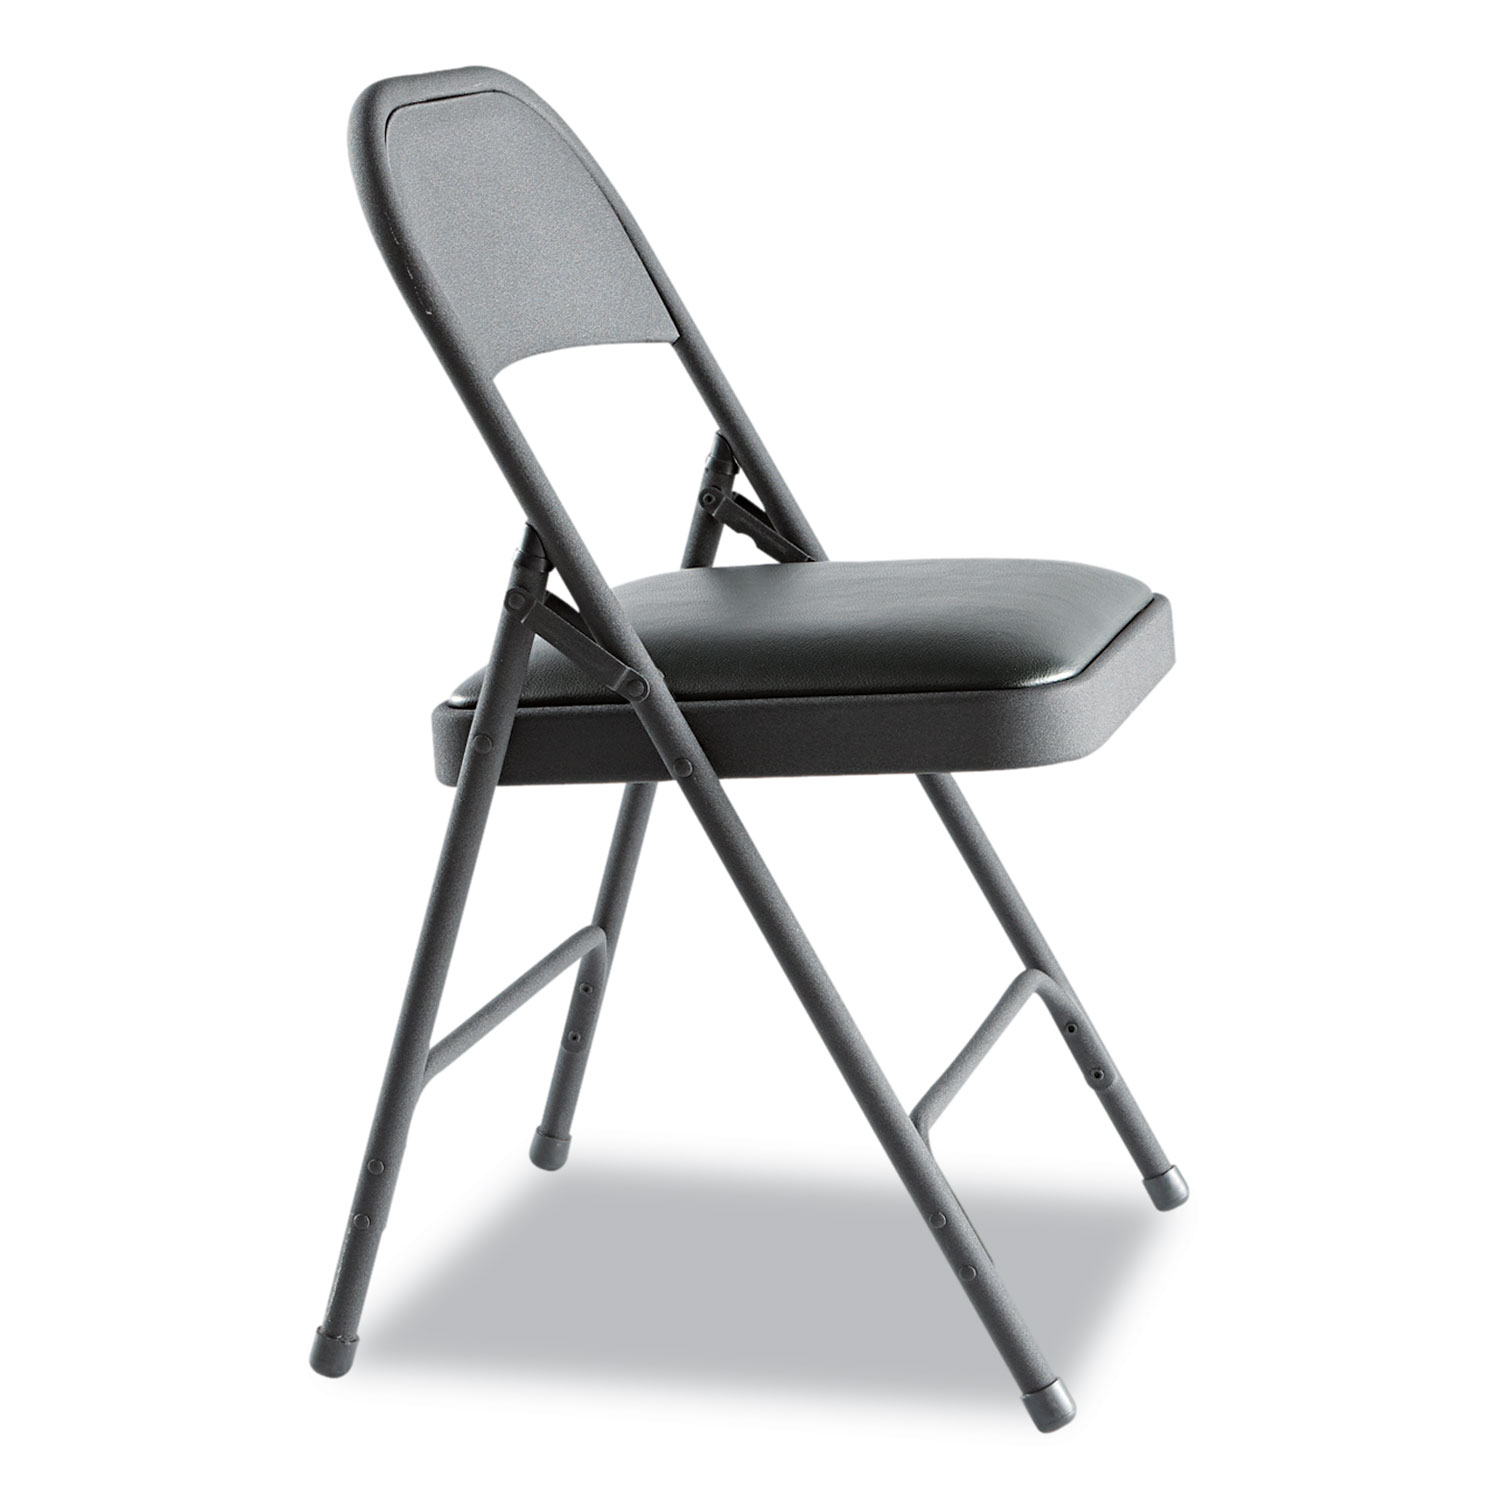 Steel Folding Chair with Two-Brace Support, Padded Seat, Graphite, 4/Carton